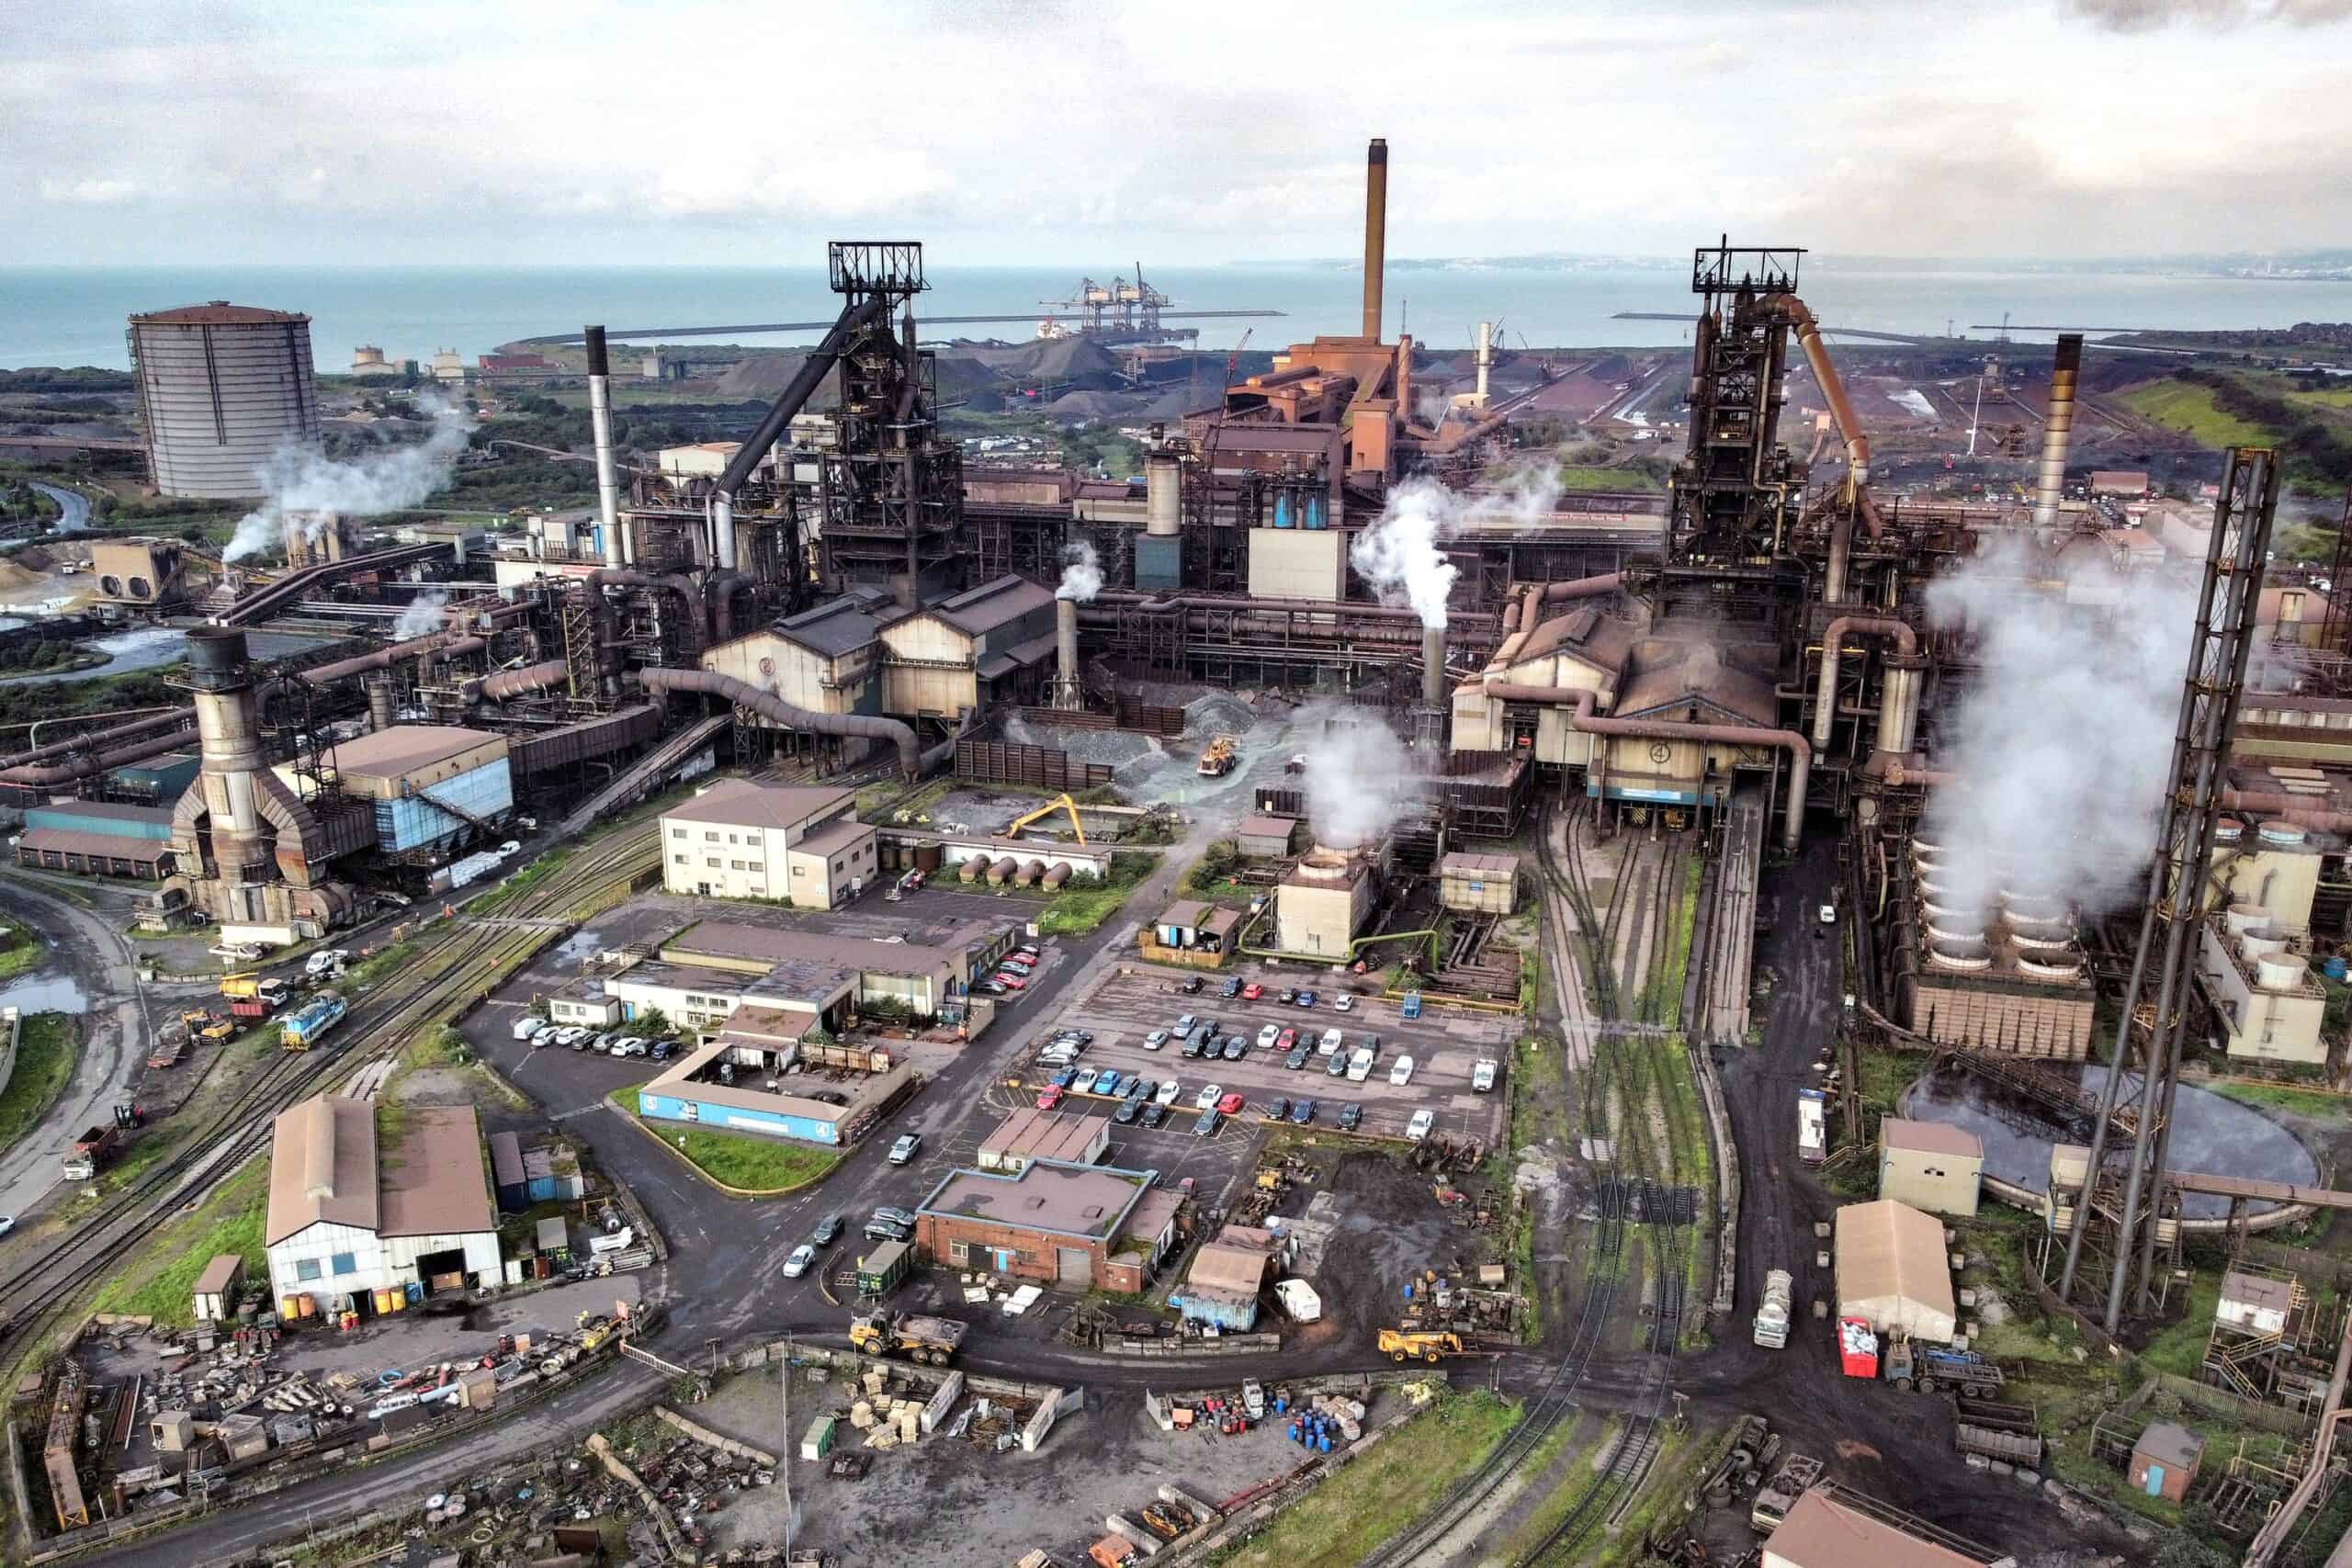 Owner of Tata Steel rakes in £3bn profit as it axes 3,000 jobs due to ‘financial reasons’